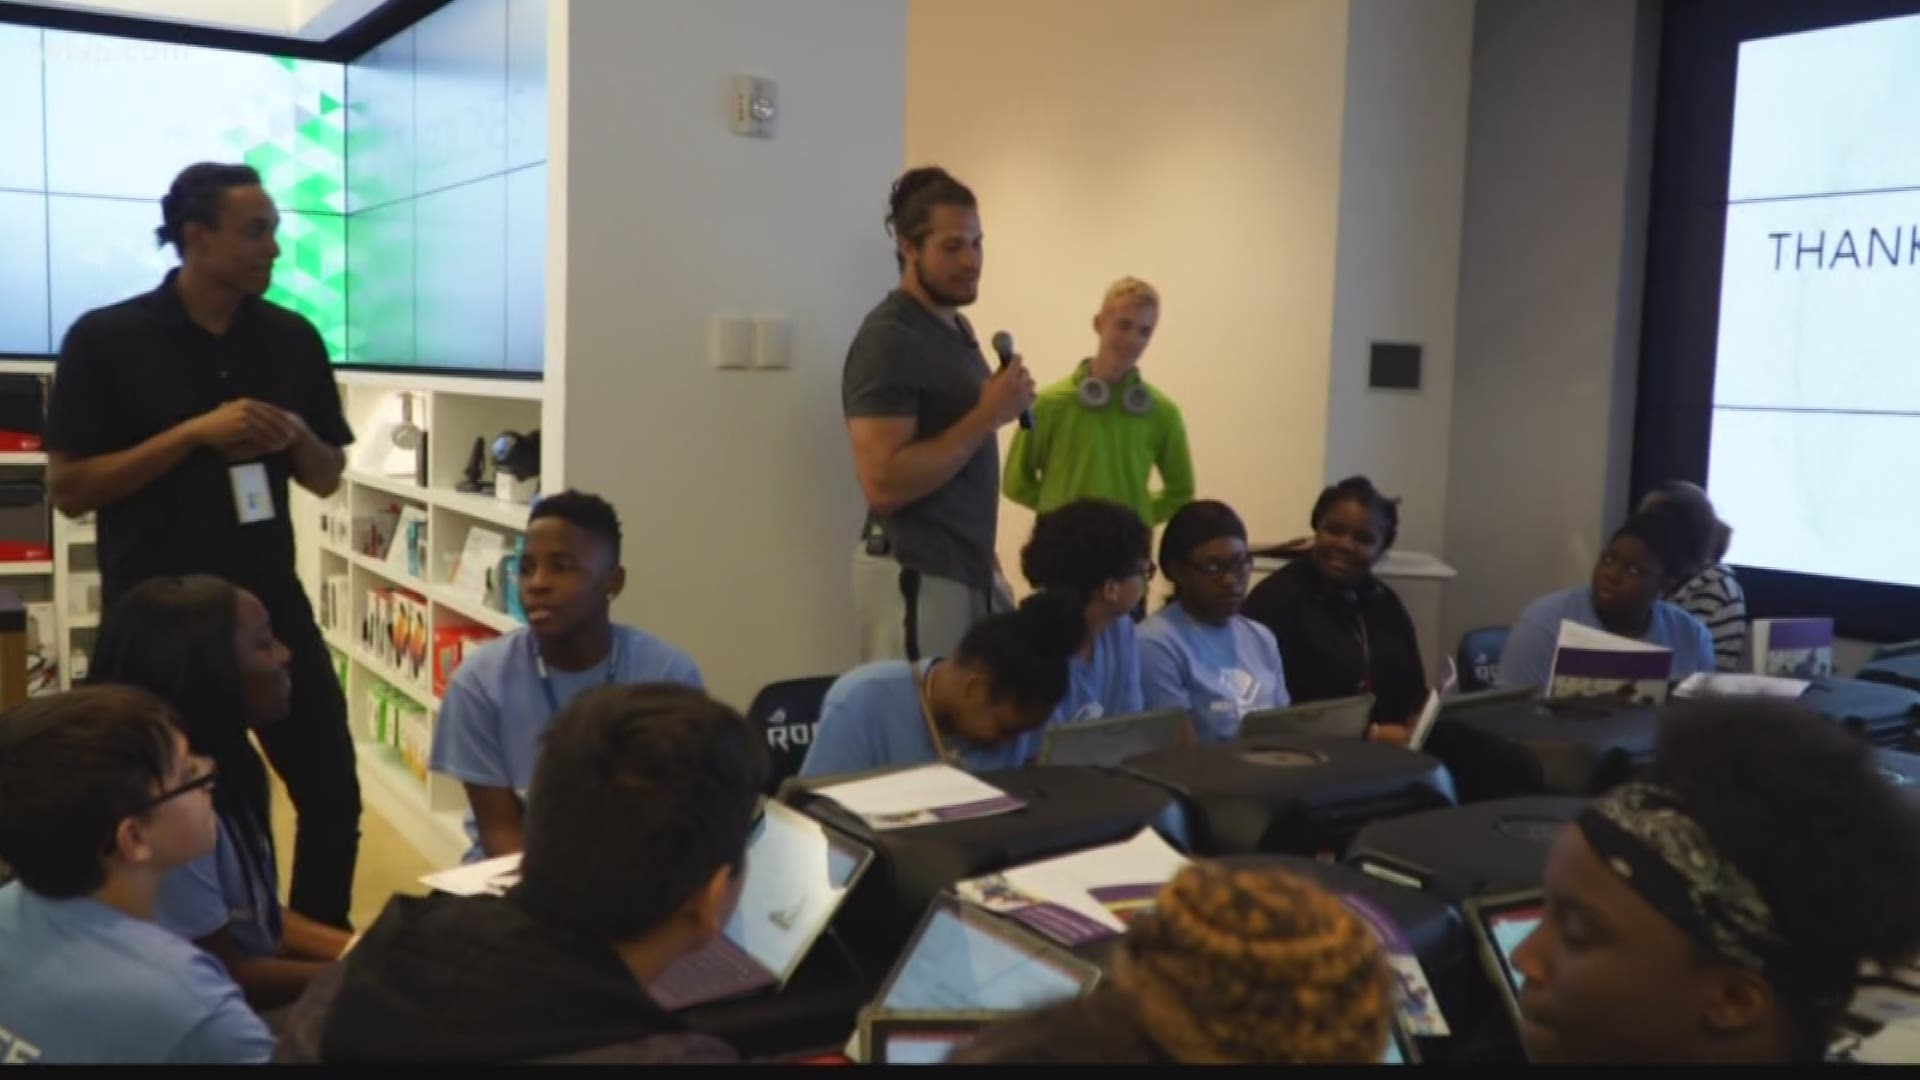 Anthony Chickillo, linebacker for the Pittsburgh Steelers, gives back to the kids in his home town. 

A select group of the Boys and Girls Clubs in the Tampa Bay area attended a Youth Spark Camp Thursday evening at the Tampa Microsoft store.